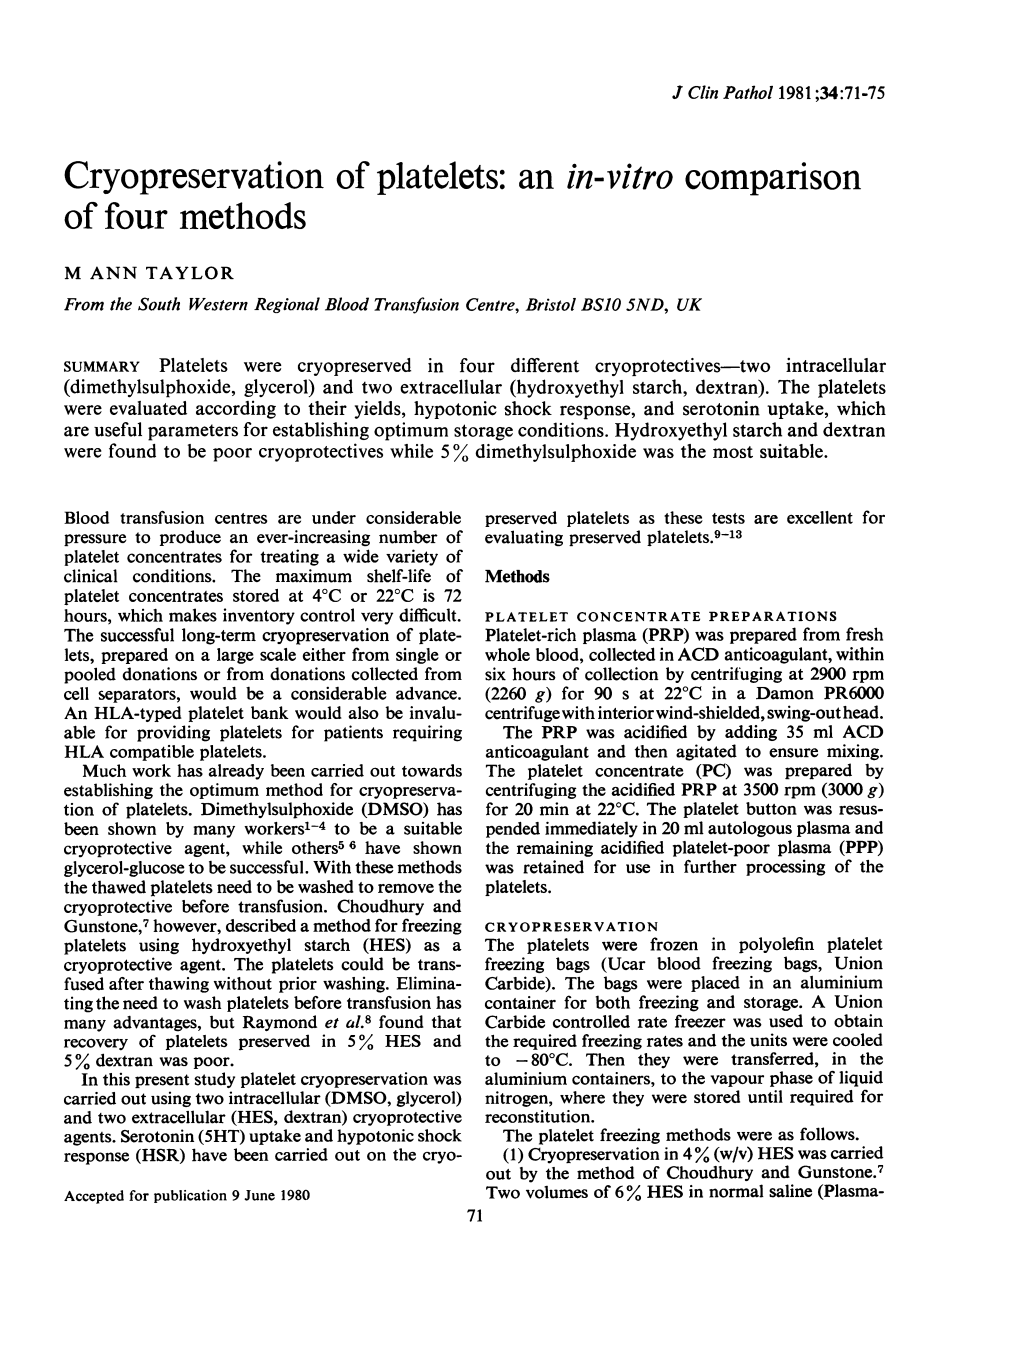 Cryopreservation of Platelets: an In-Vitro Comparison of Four Methods